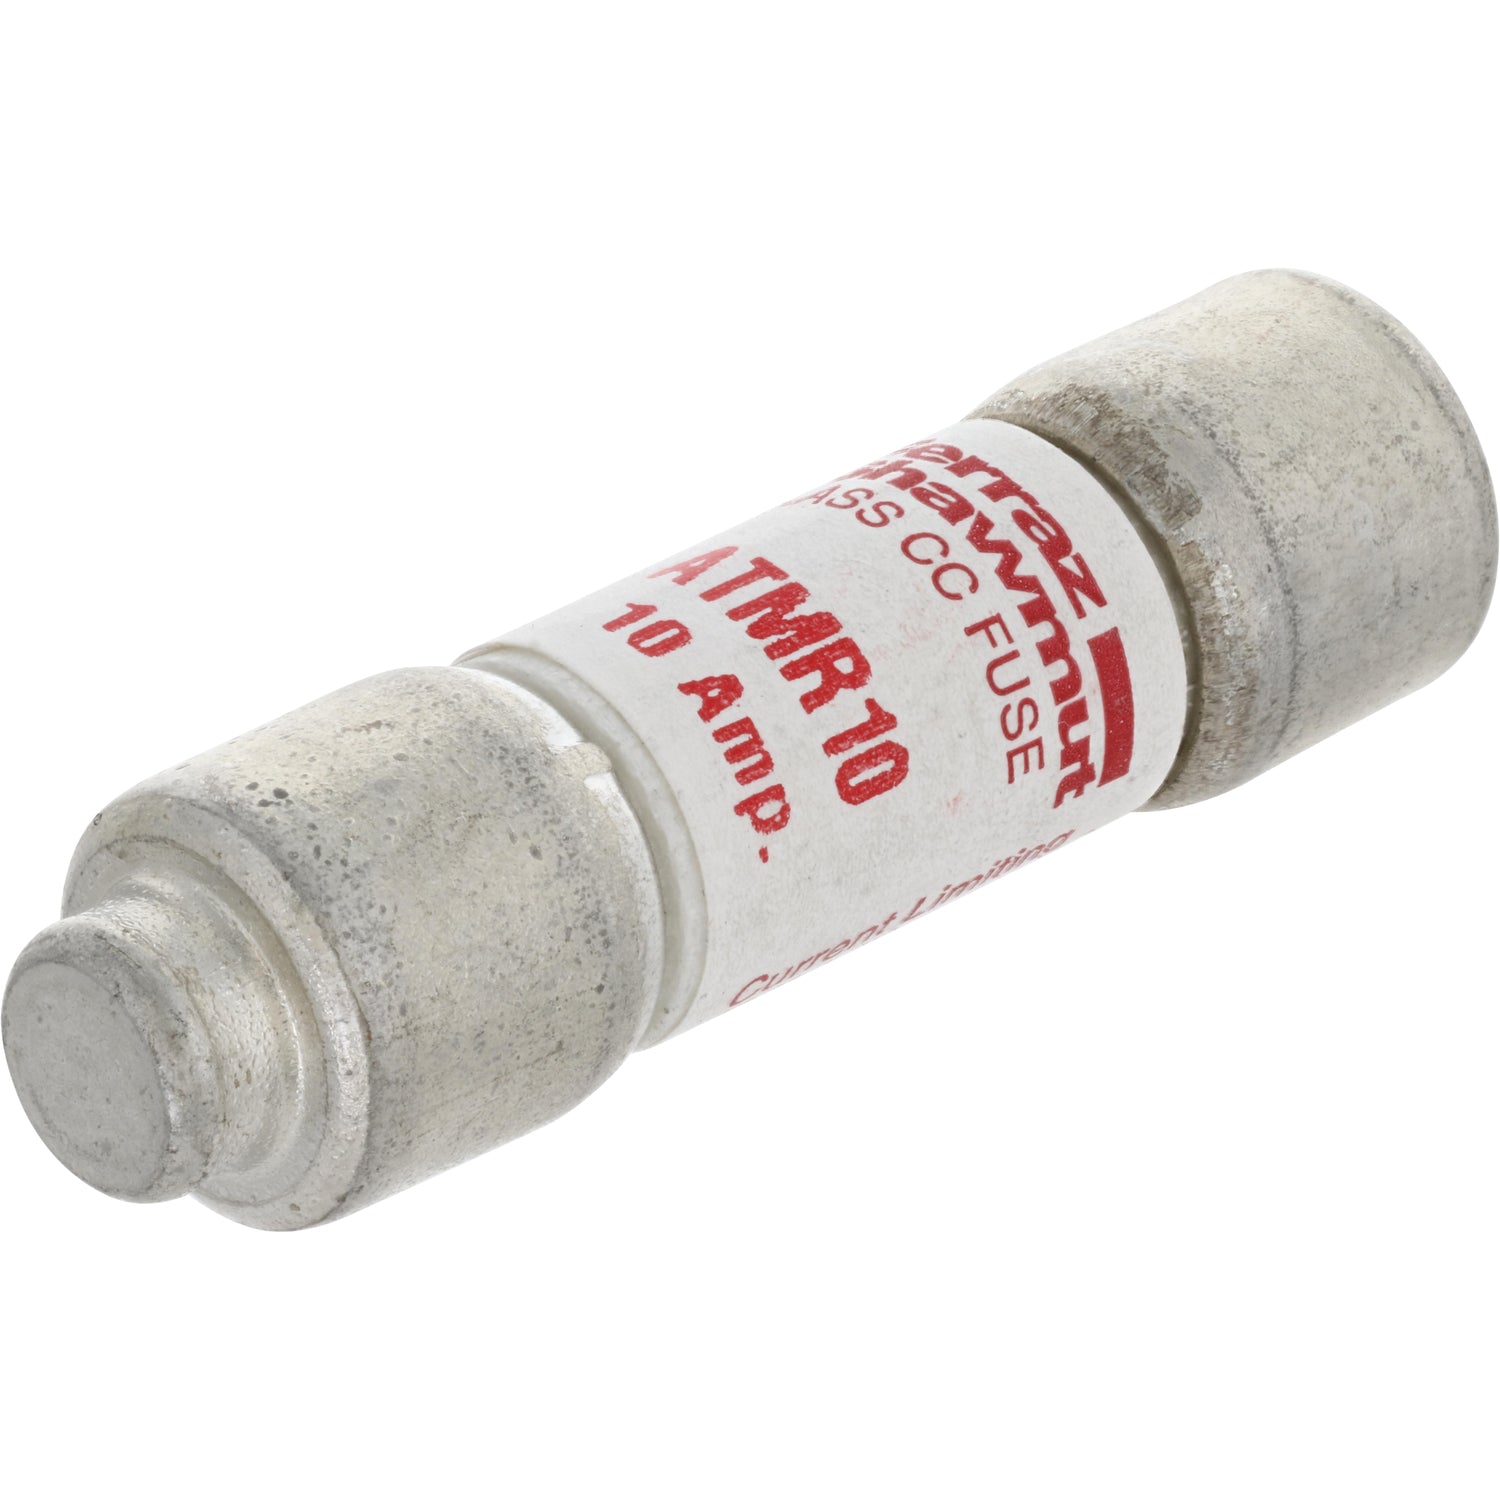 Mersen 10A Fast Acting Fuse 0.5625&quot; x 2&quot; shown on white background.